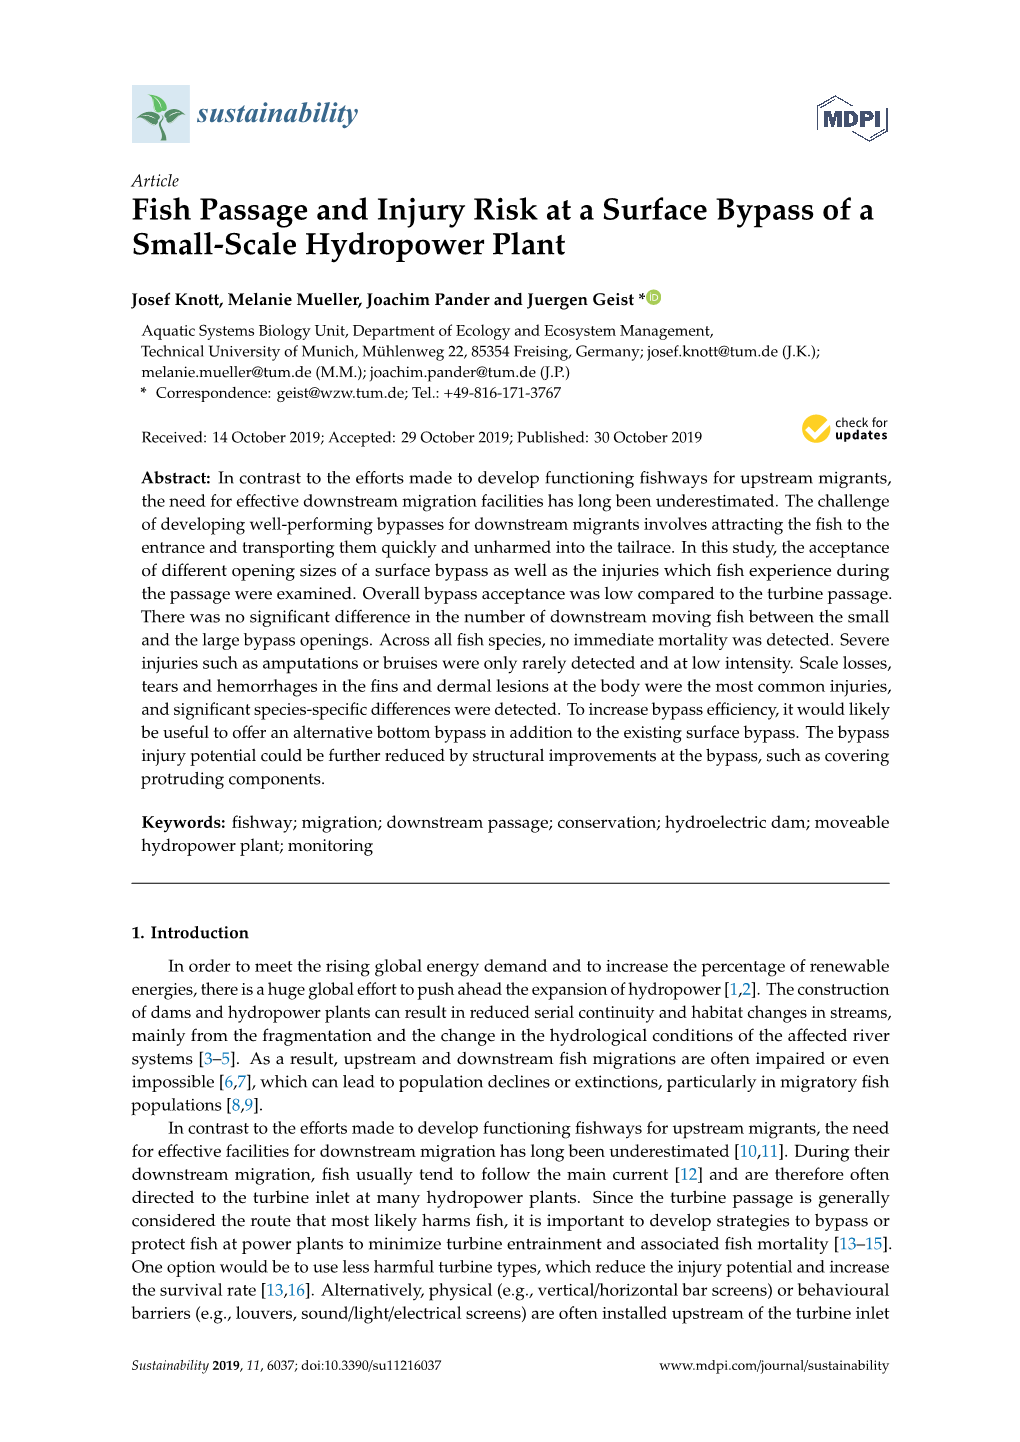 Fish Passage and Injury Risk at a Surface Bypass of a Small-Scale Hydropower Plant